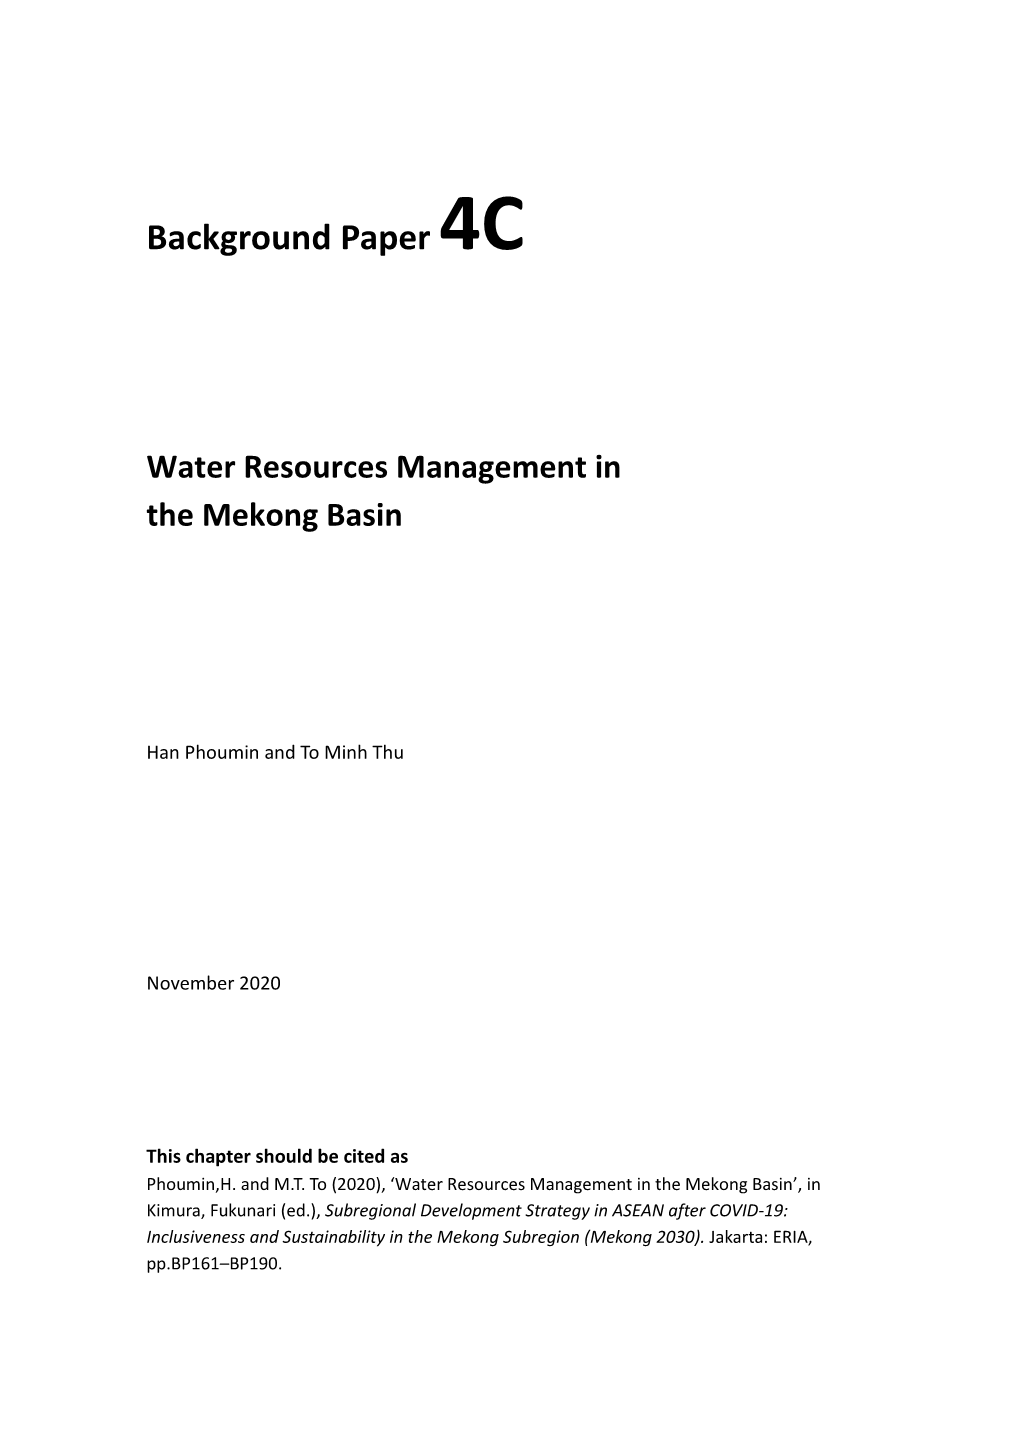 Water Resources Management in the Mekong Basin